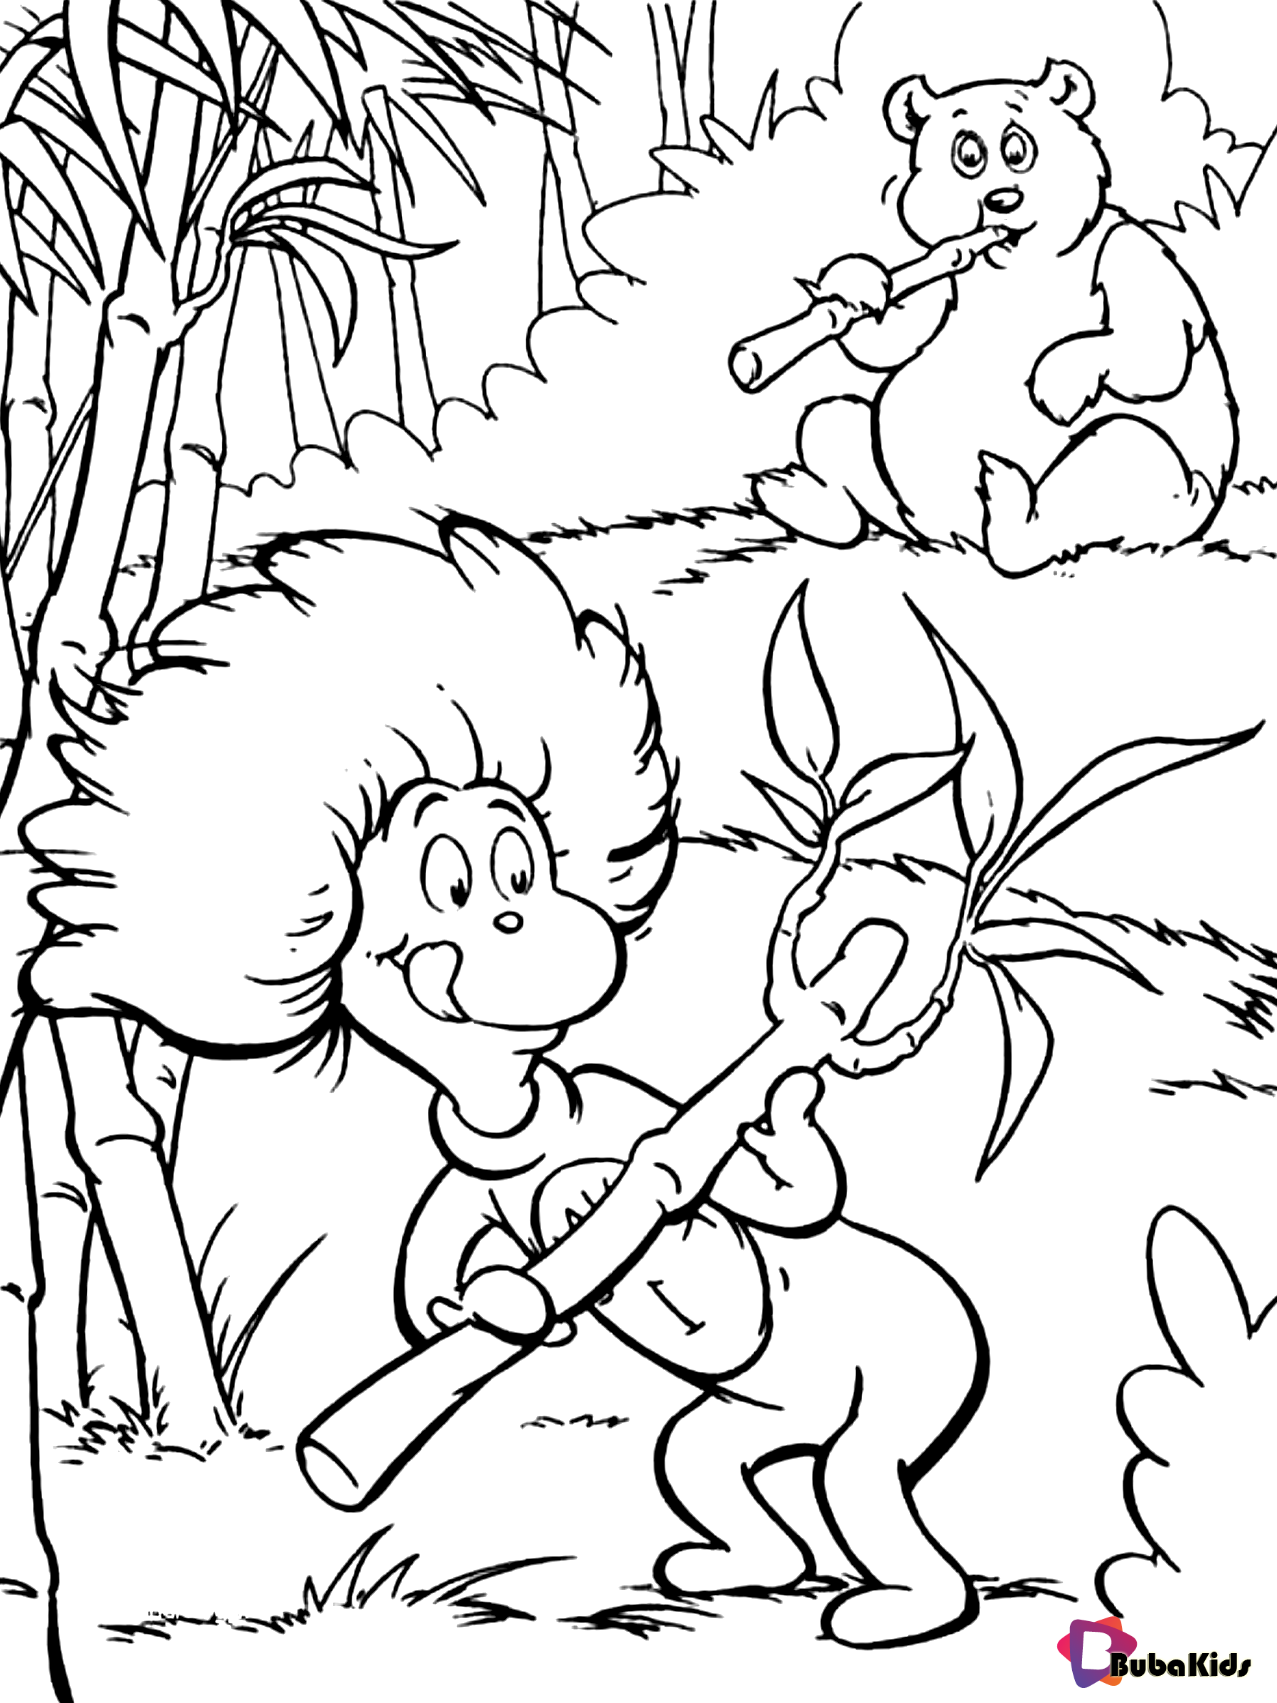 Dr seuss Thing 1 from book The Cat in The Hat coloring pages Wallpaper